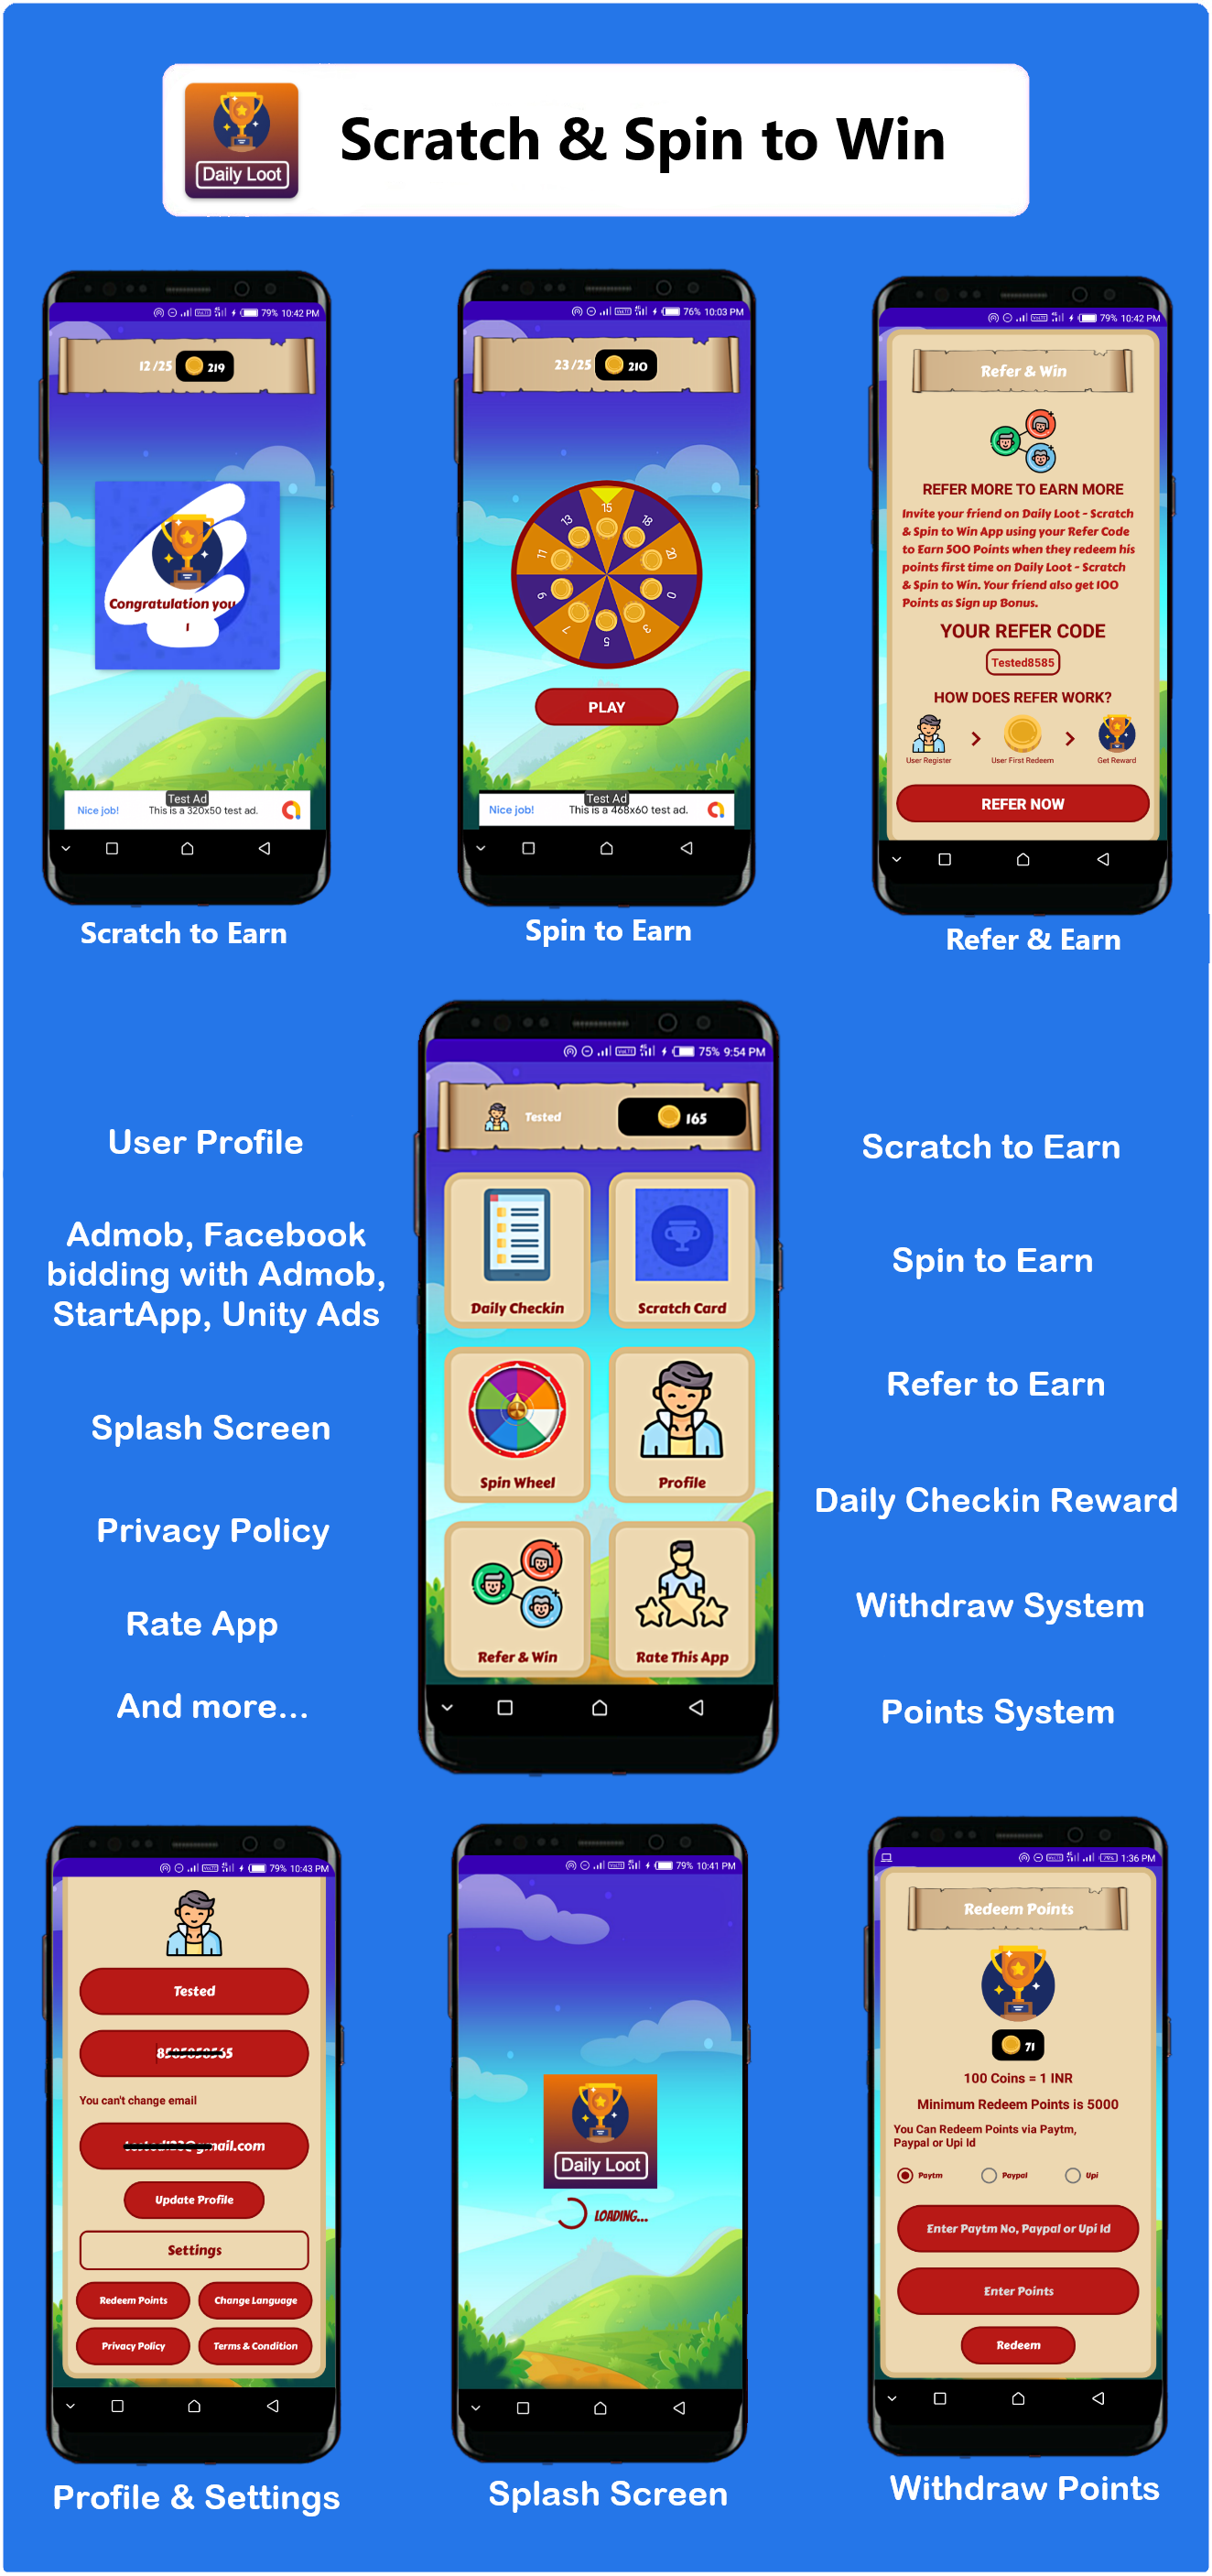 Scratch & Spin to Win Android App with Earning System (Admob, Facebook bidding, StartApp, Unity Ads) - 4